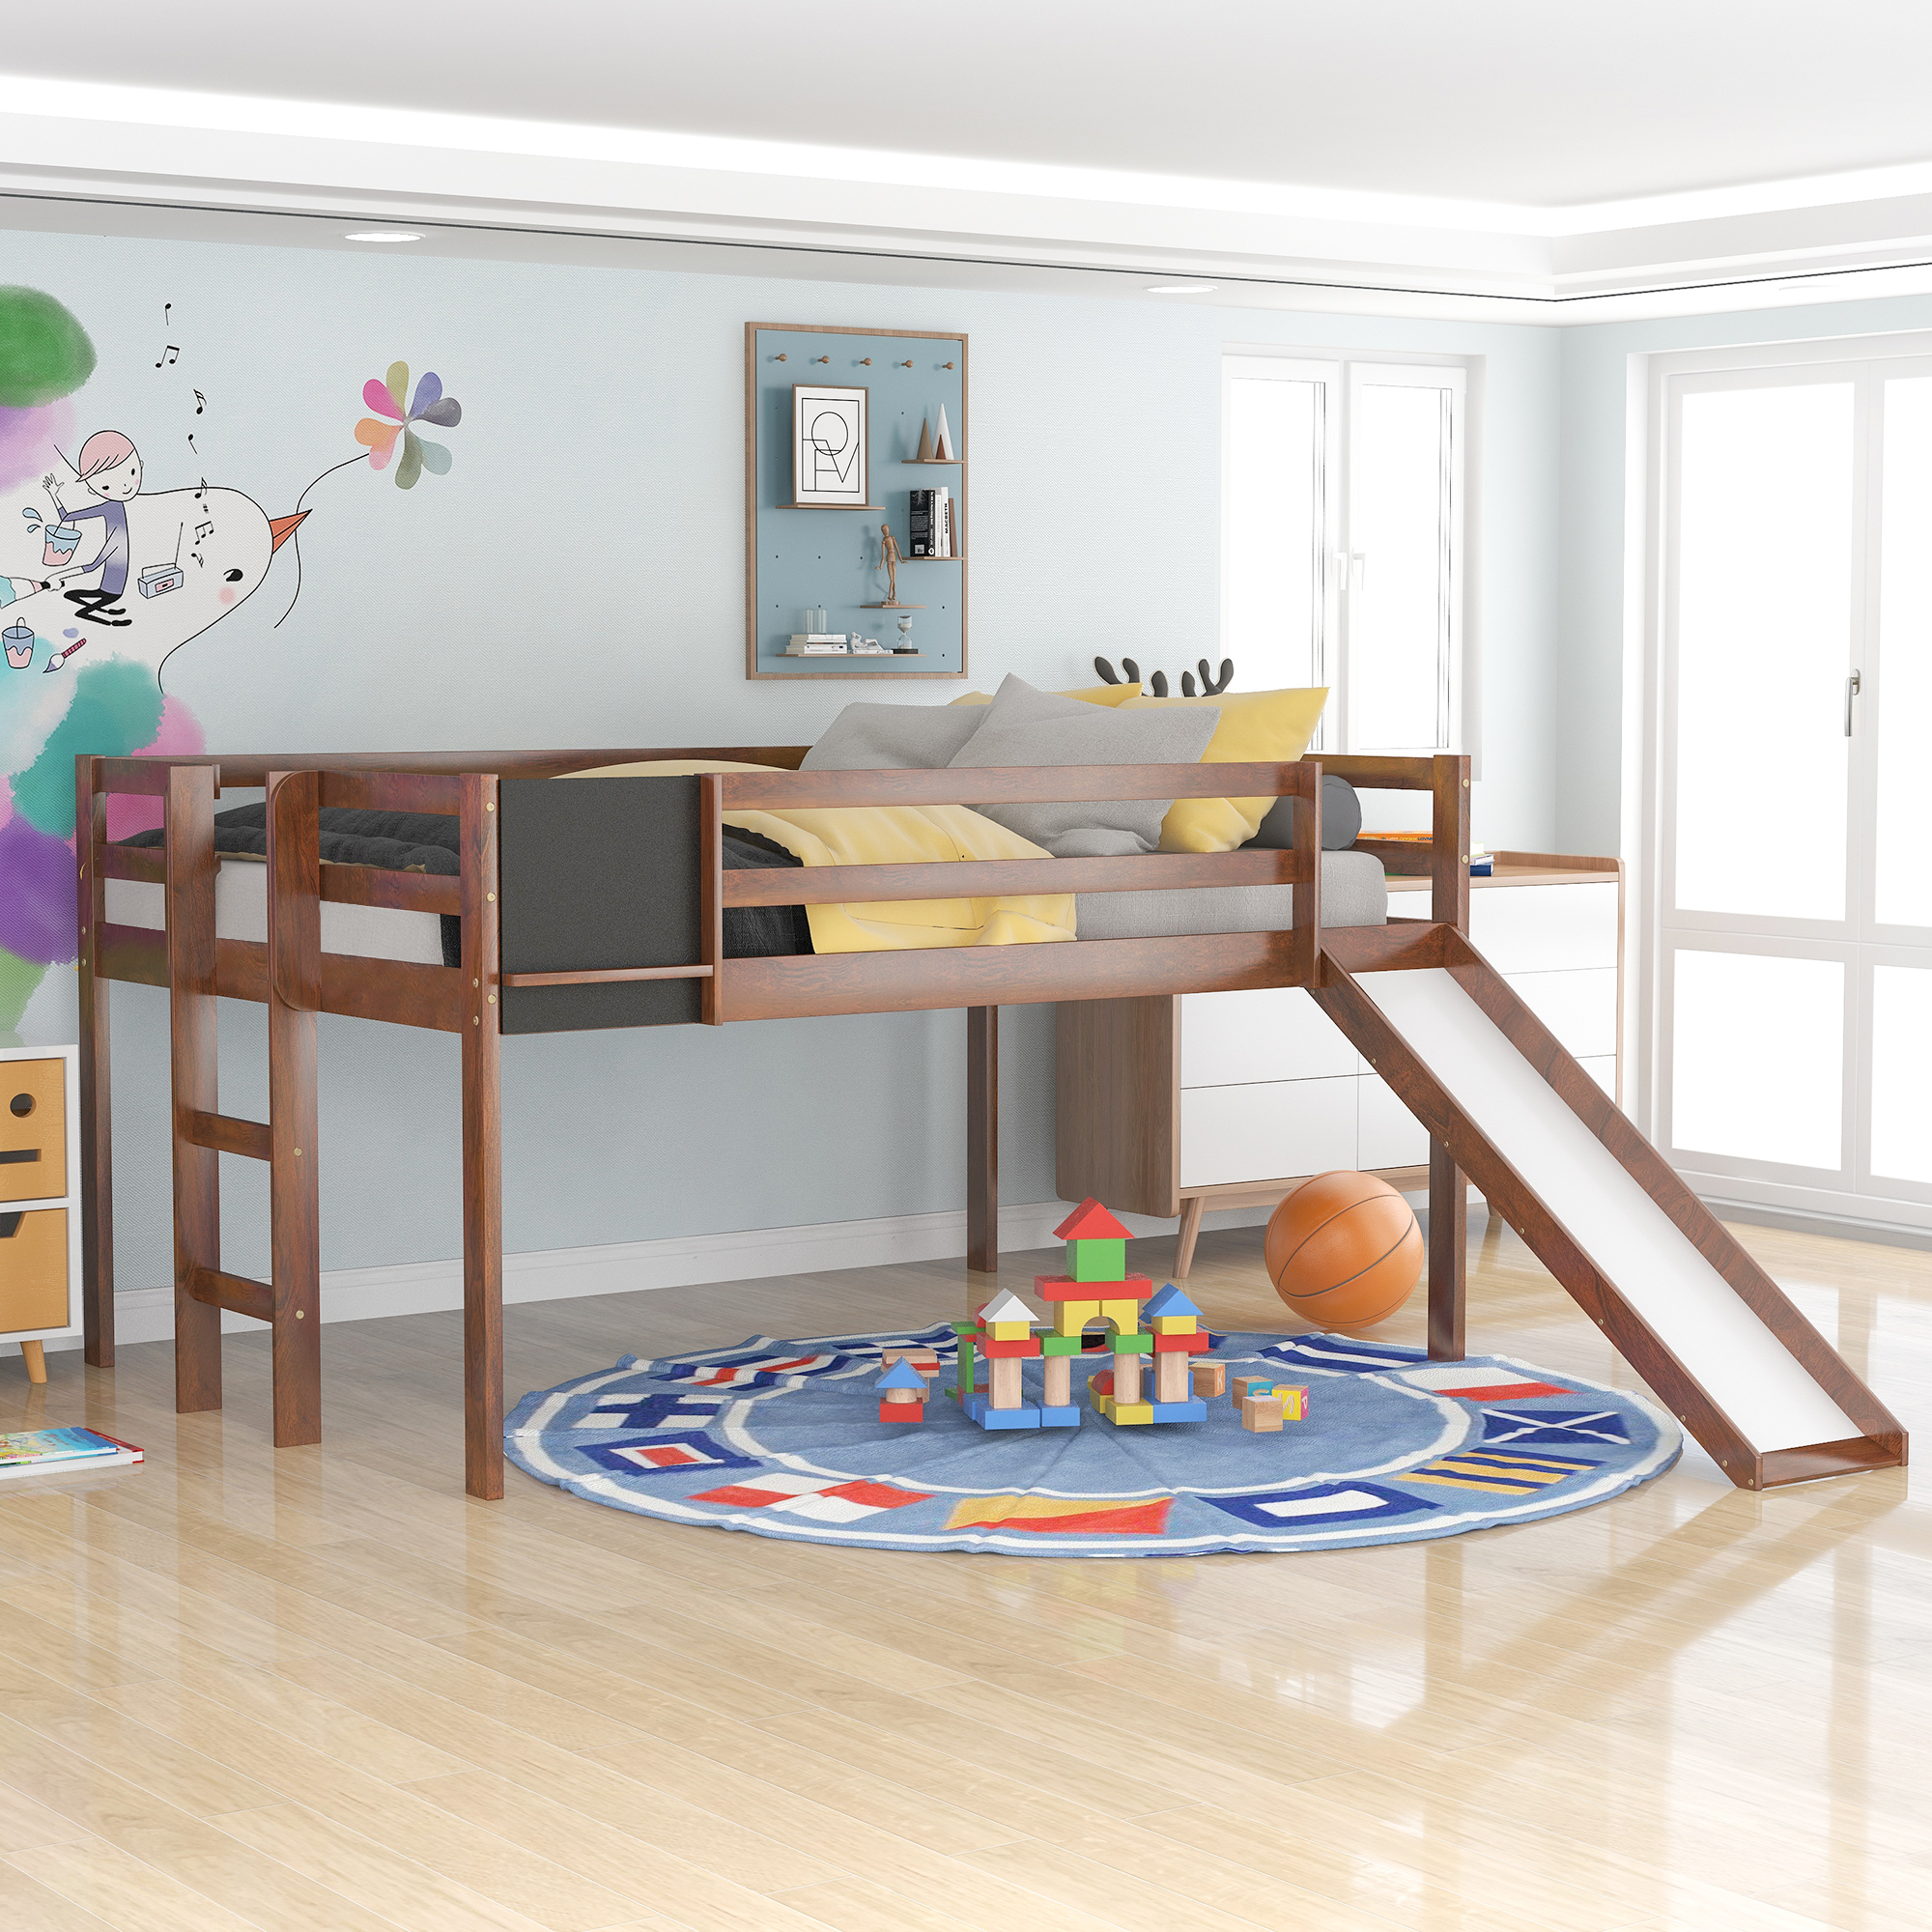 Full size Loft Bed Wood Bed with Slide, Stair and Chalkboard,Walnut-Boyel Living